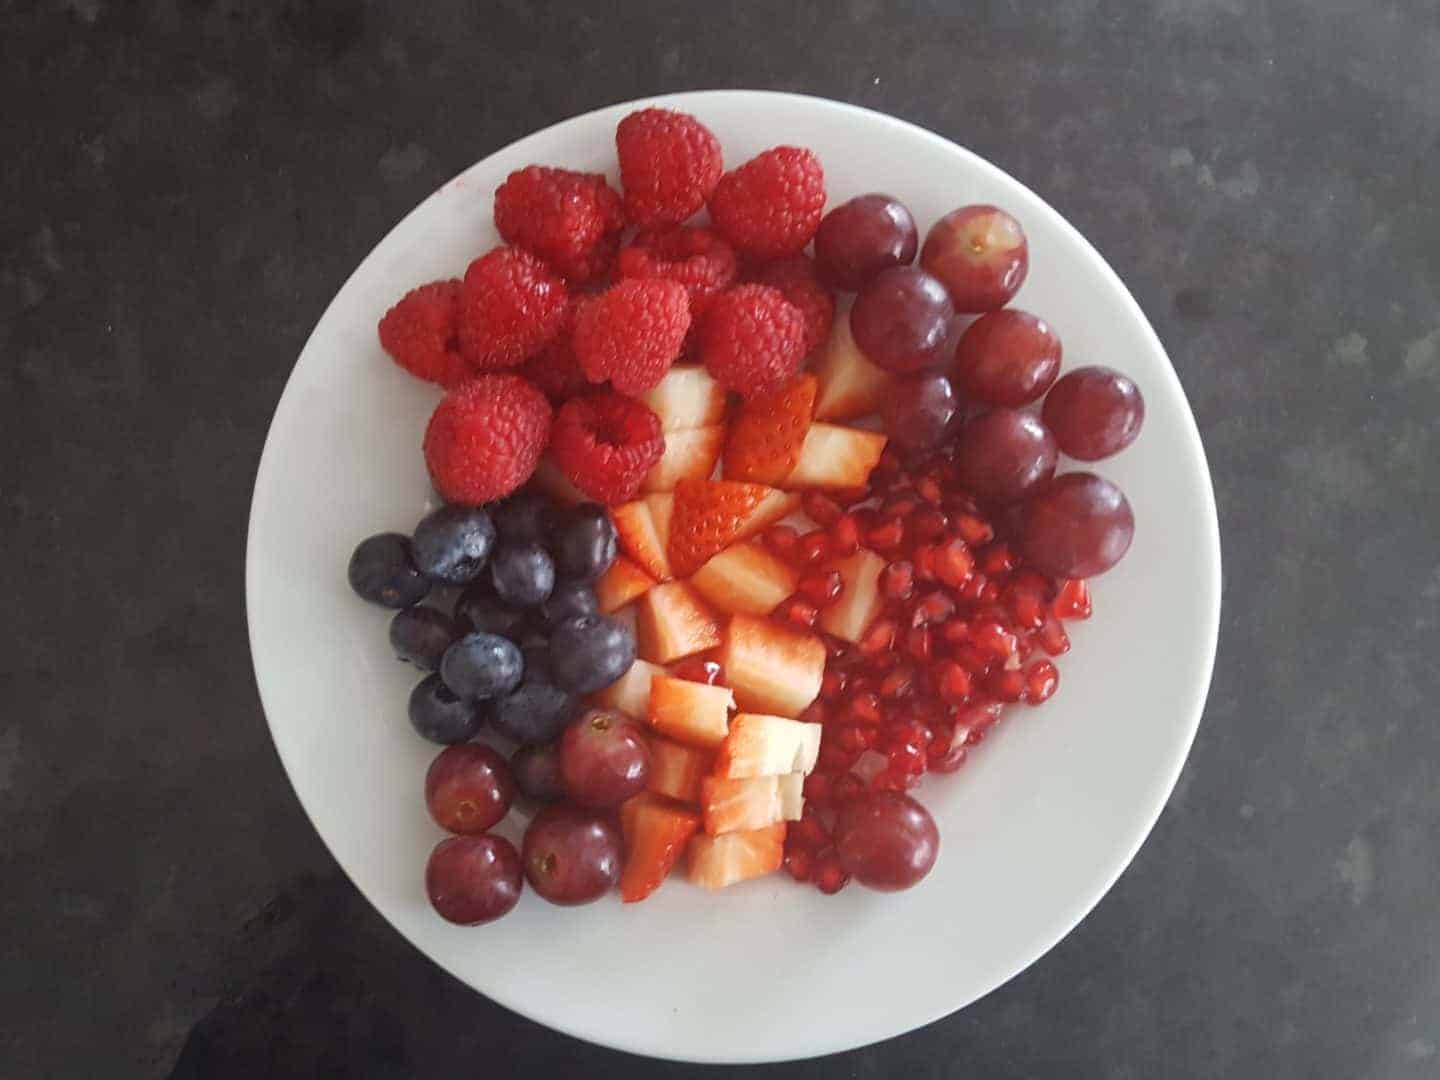 Can you eat too much fruit? Plate full of red berries. 